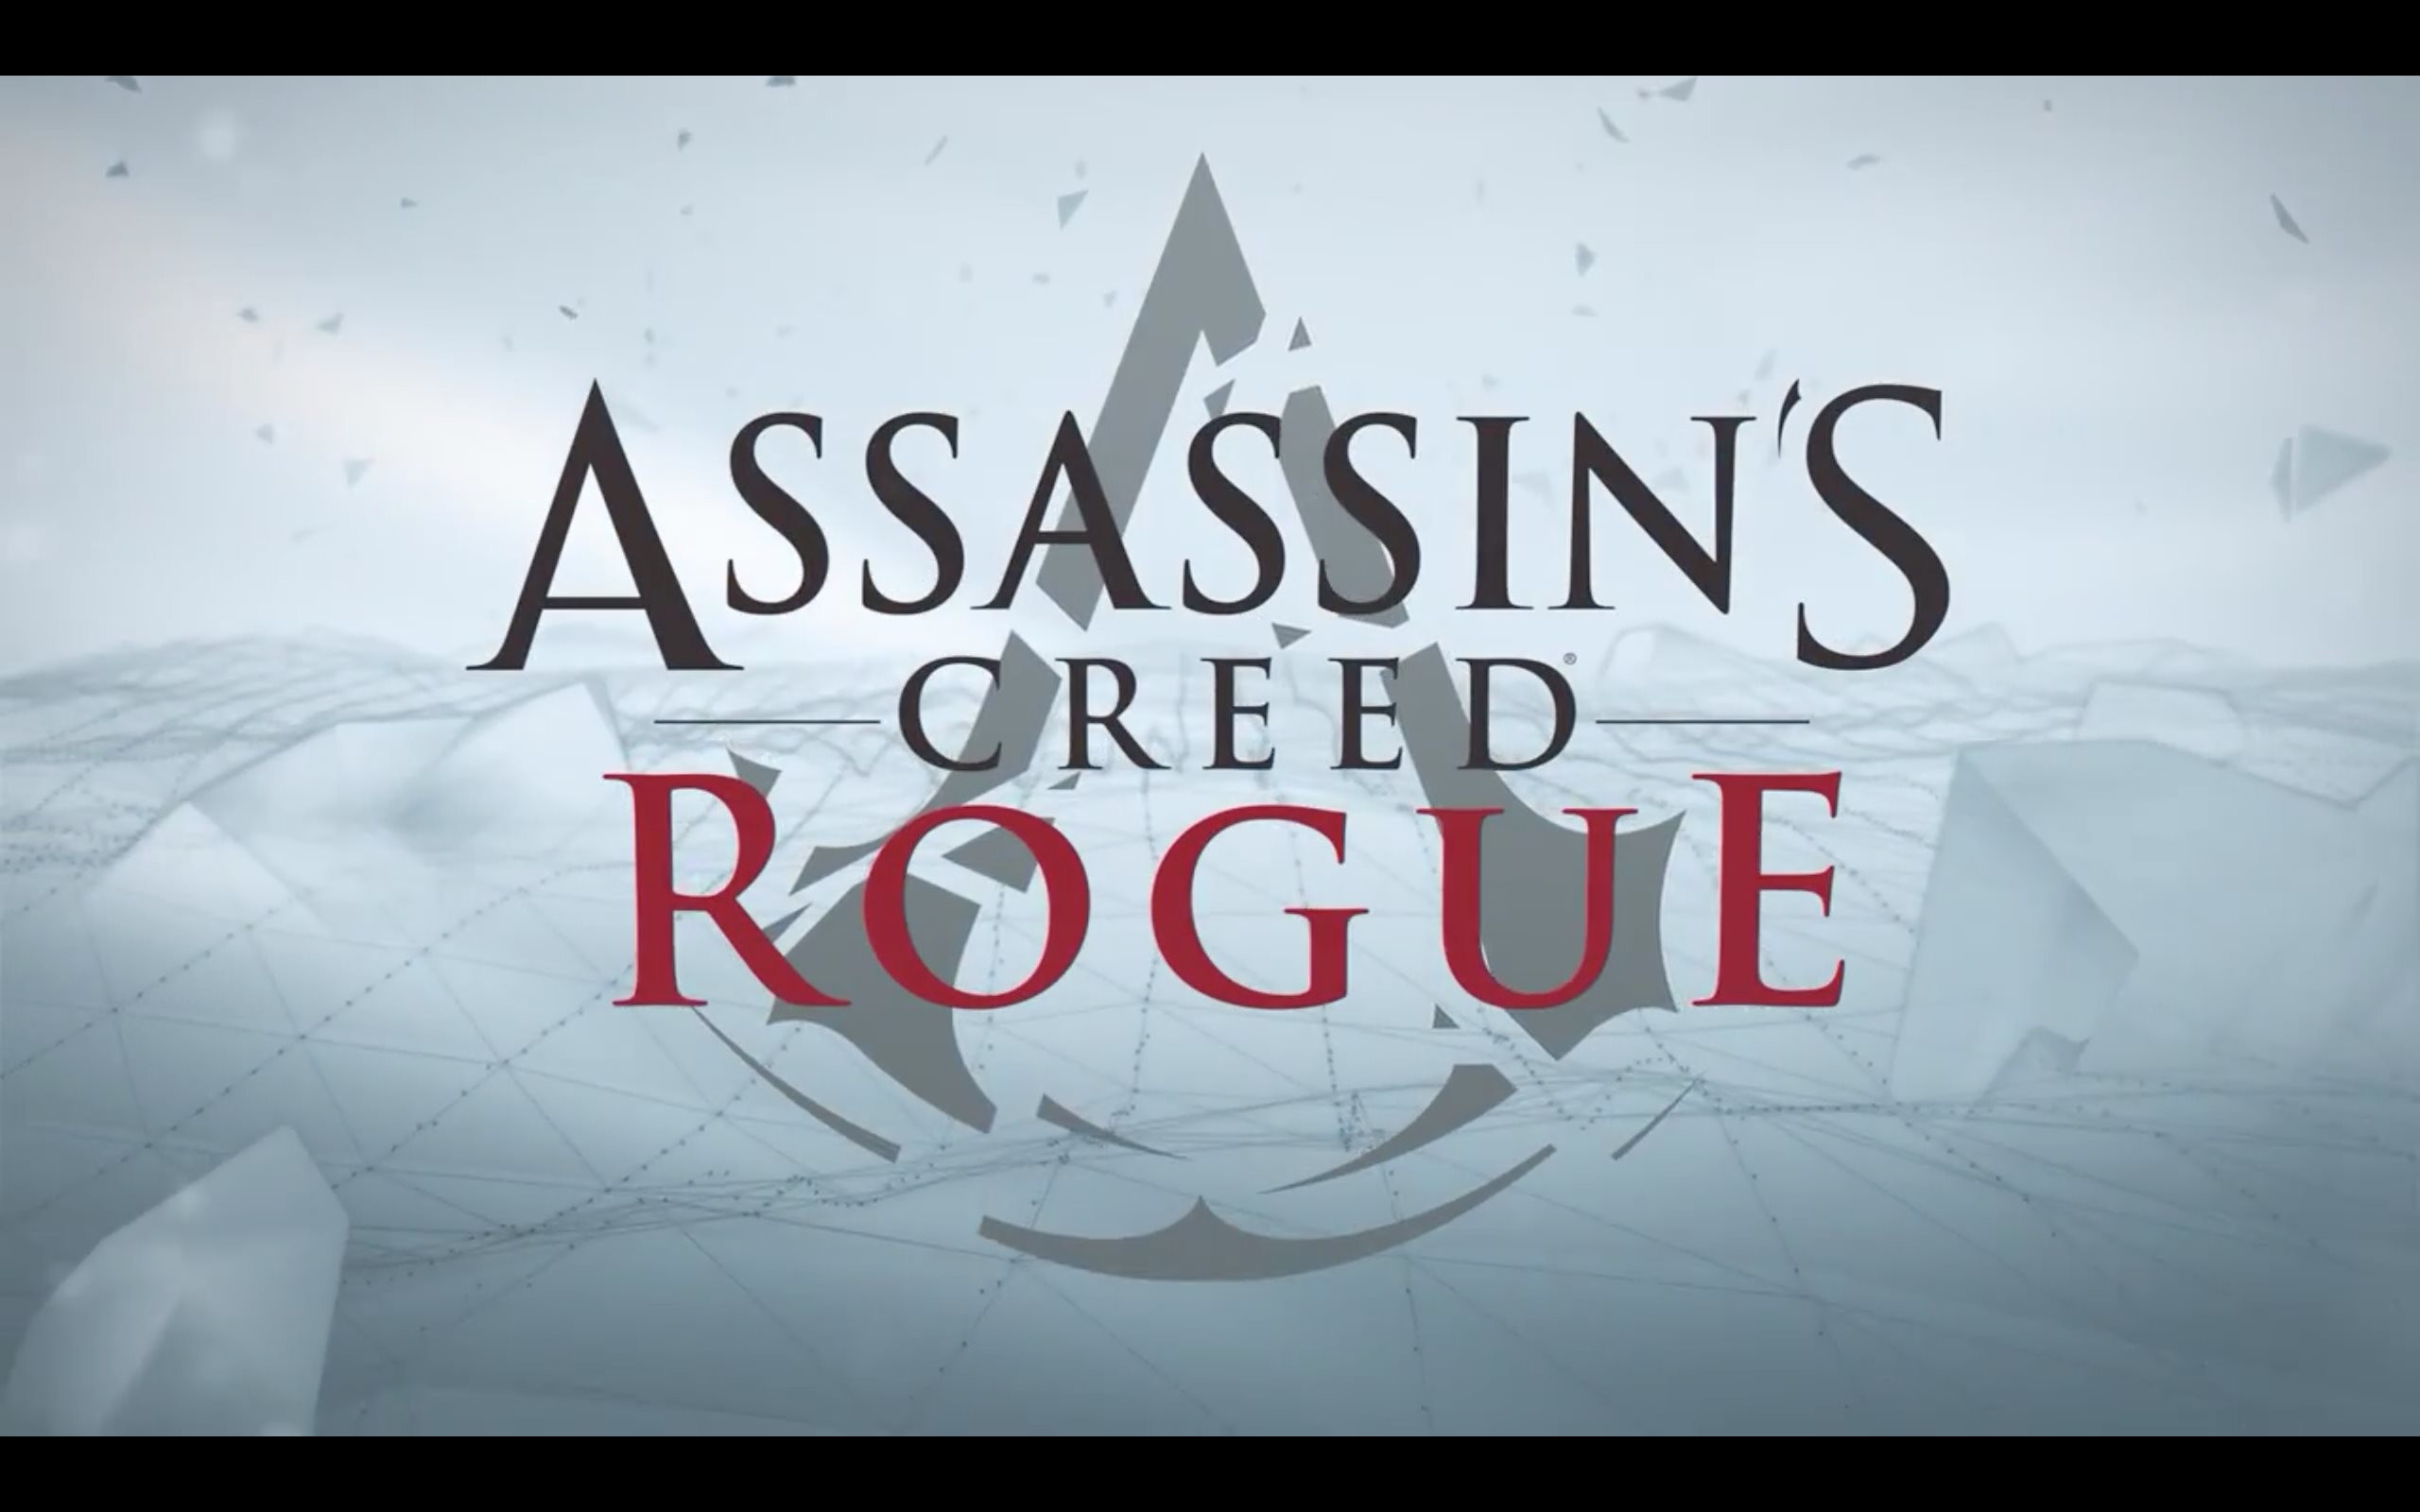 2560x1600 ... on: 1920x1200, 1680x1050, 1440x900) Samsung Galaxy Tab & iPad:  2048x1536 (compatible with almost all tablets). Assassin's Creed Rogue ...